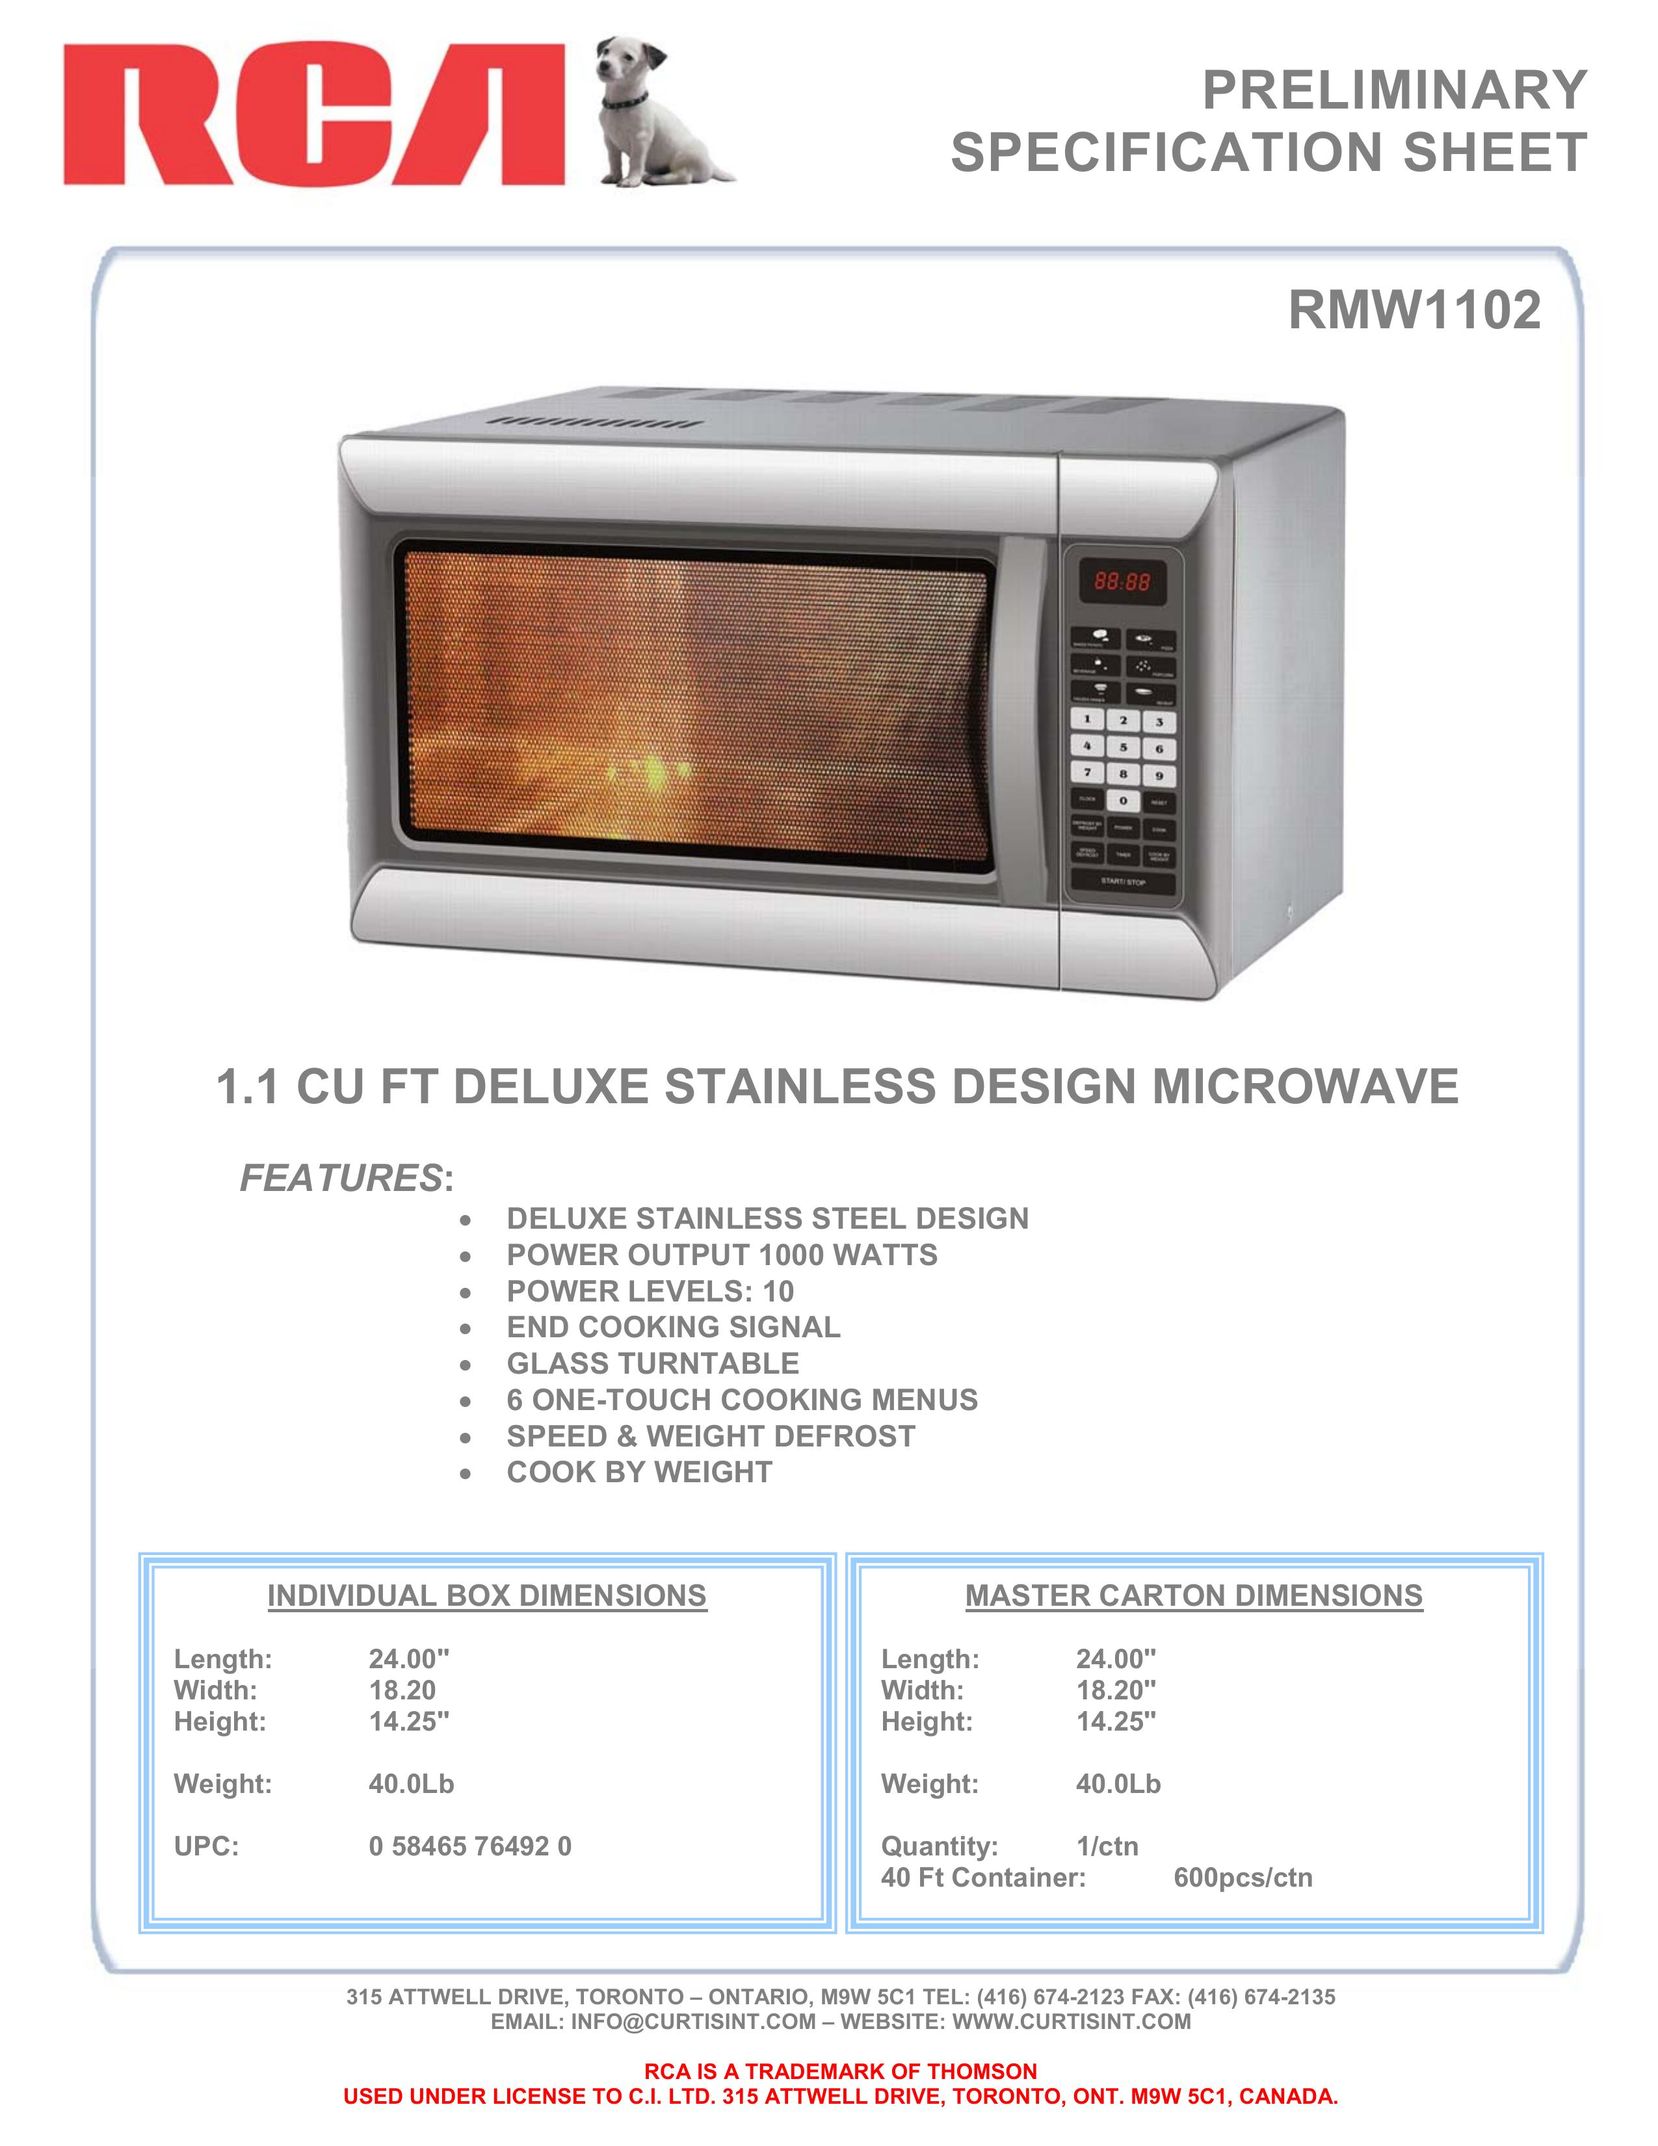 Curtis RMW1102 Microwave Oven User Manual